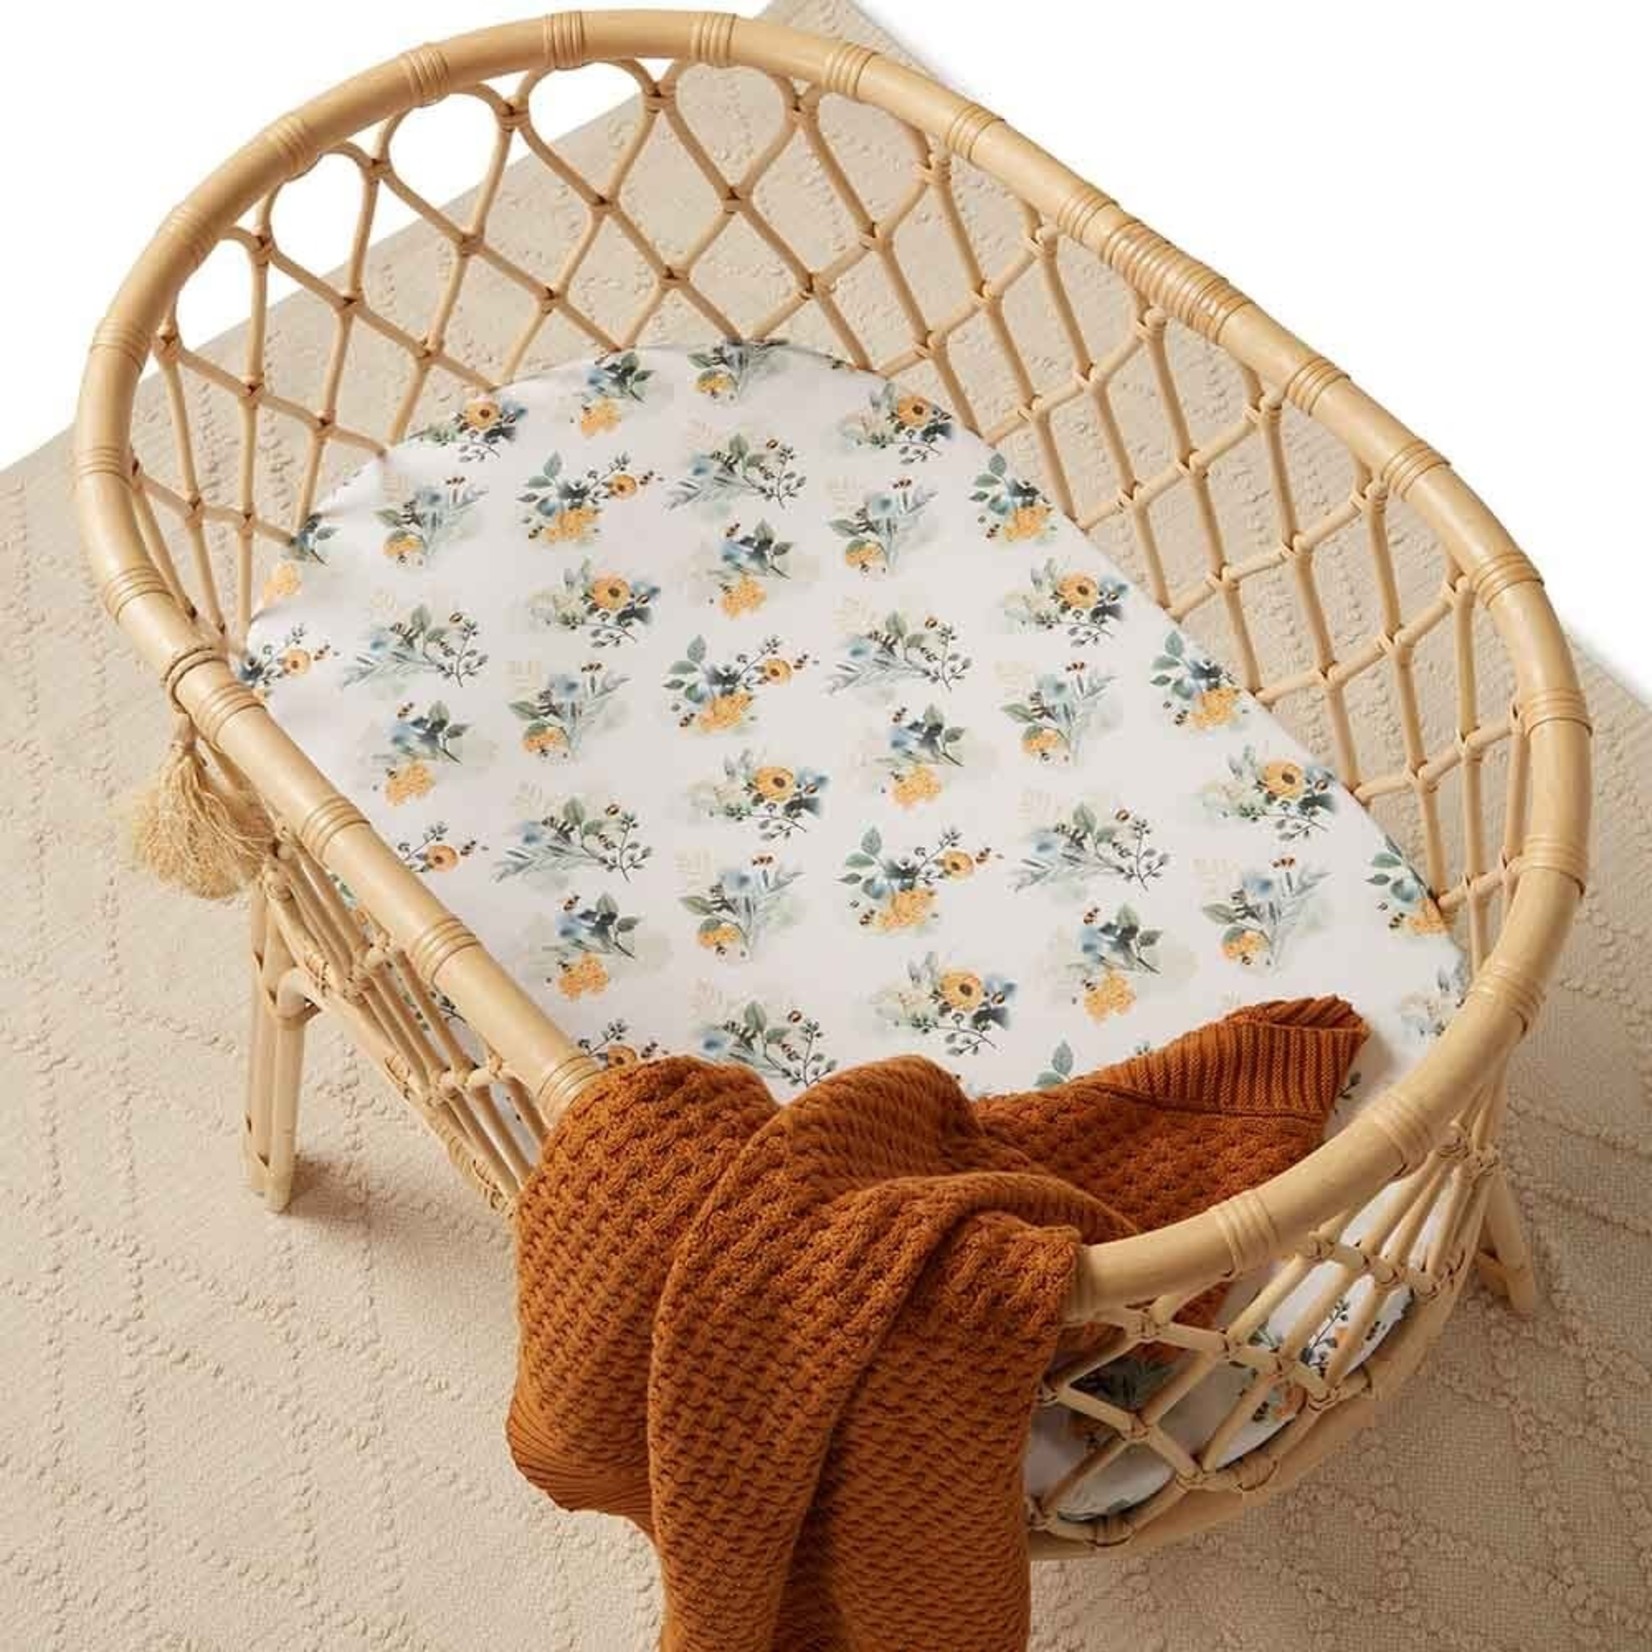 Snuggle Hunny Bassinet Sheet / Change Pad Cover-Garden Bee